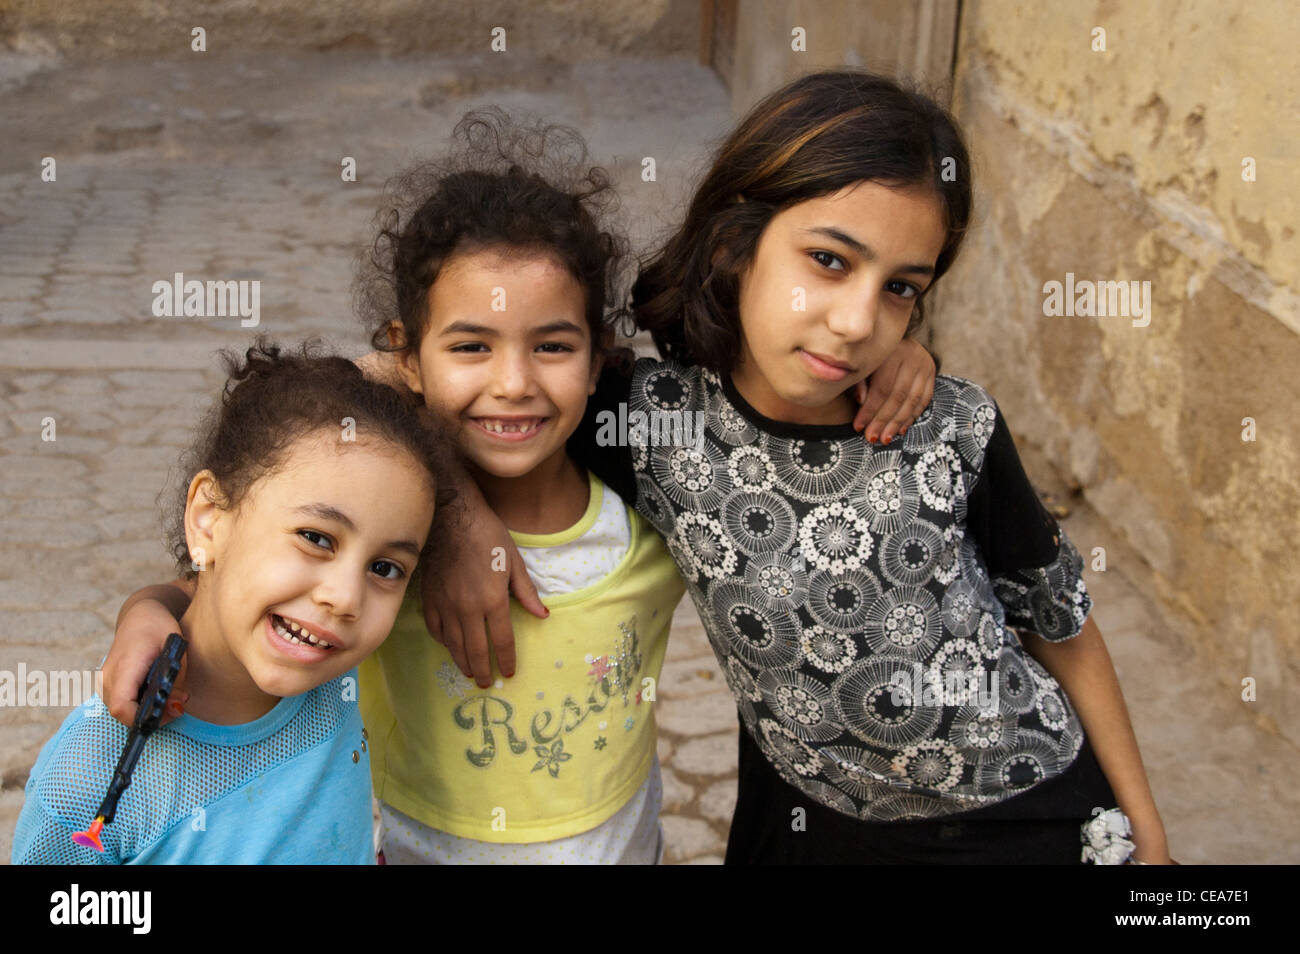 Three cheeky girls hanging out in the tannery are of the Medin in Fez, Morocco Stock Photo